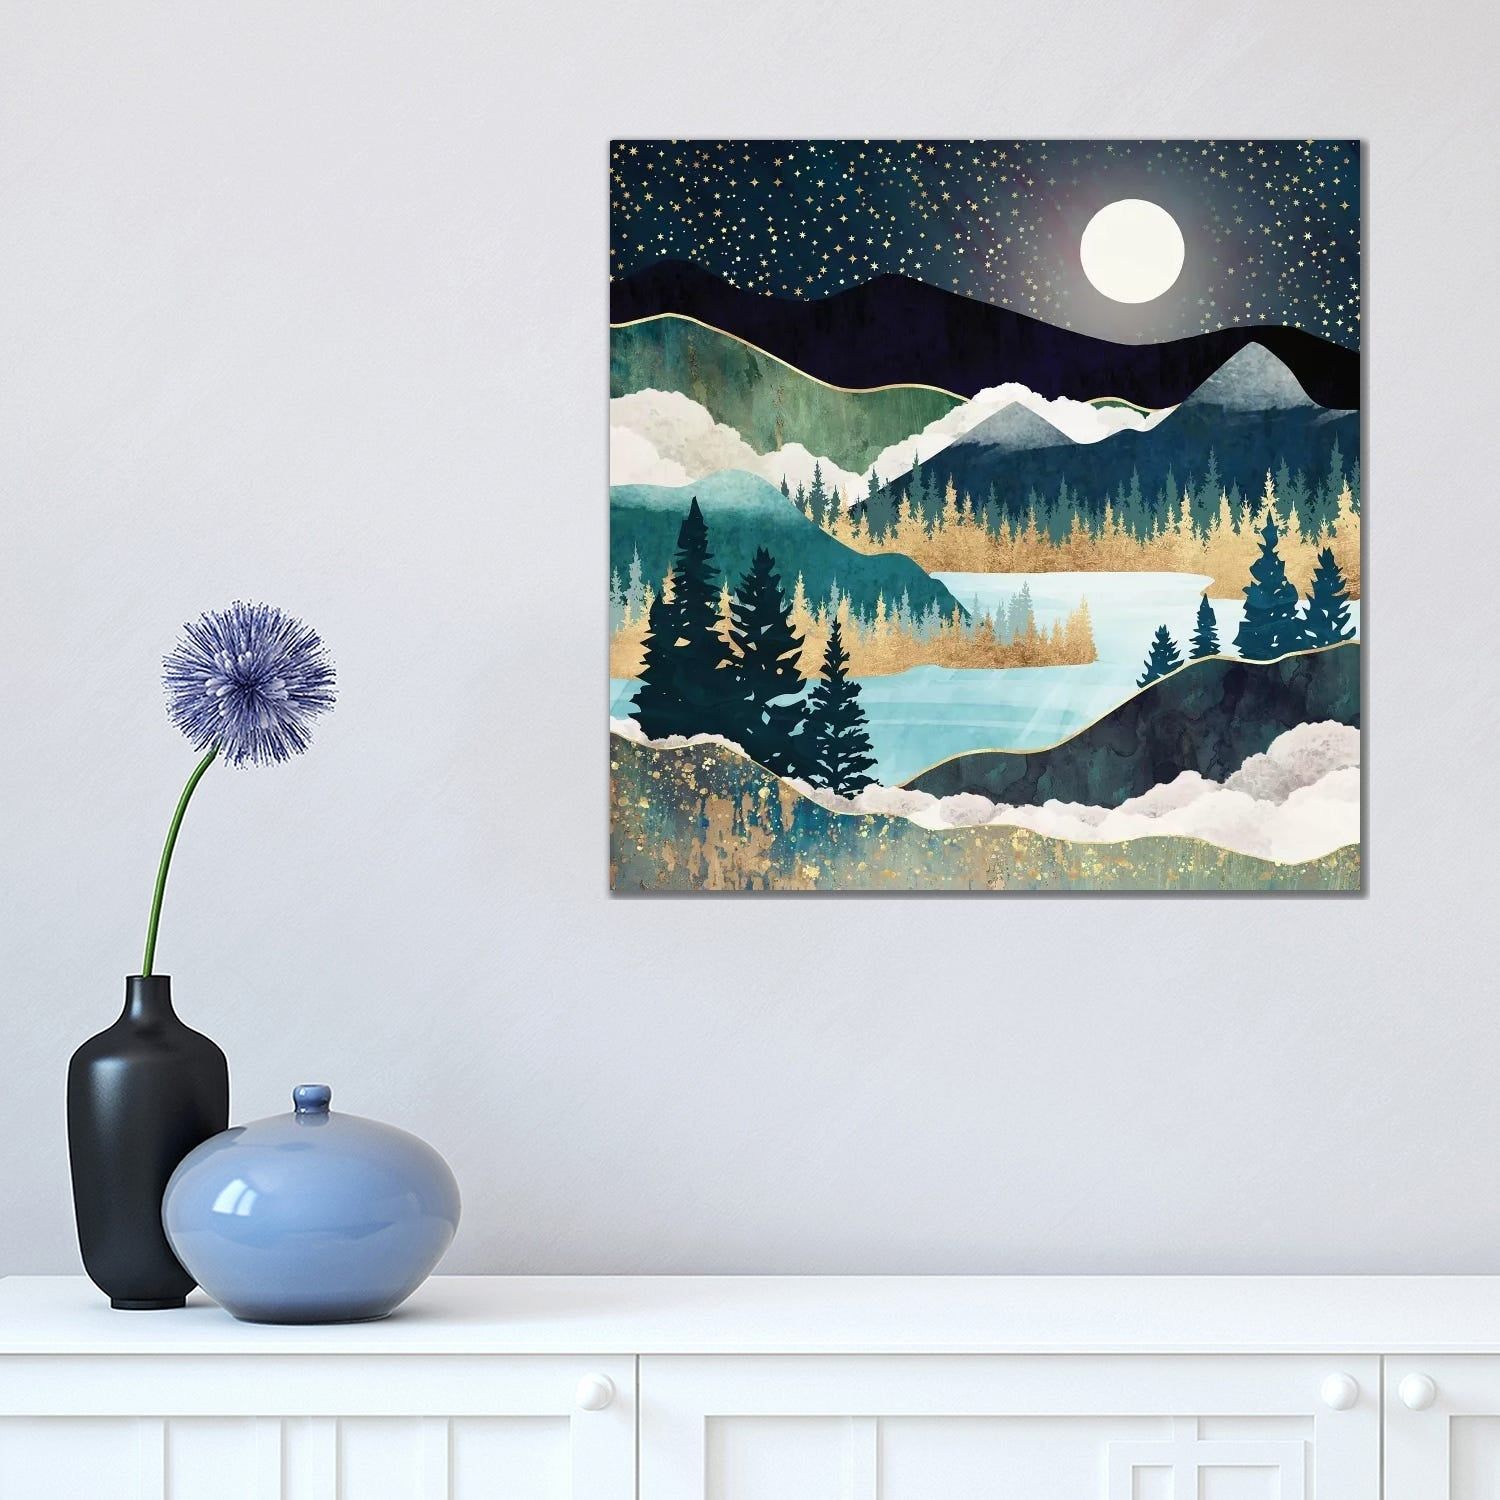 Icanvas "star Lake"spacefrog Designs Canvas Print – Overstock – 32867292 With Regard To Star Lake Wall Art (View 11 of 15)